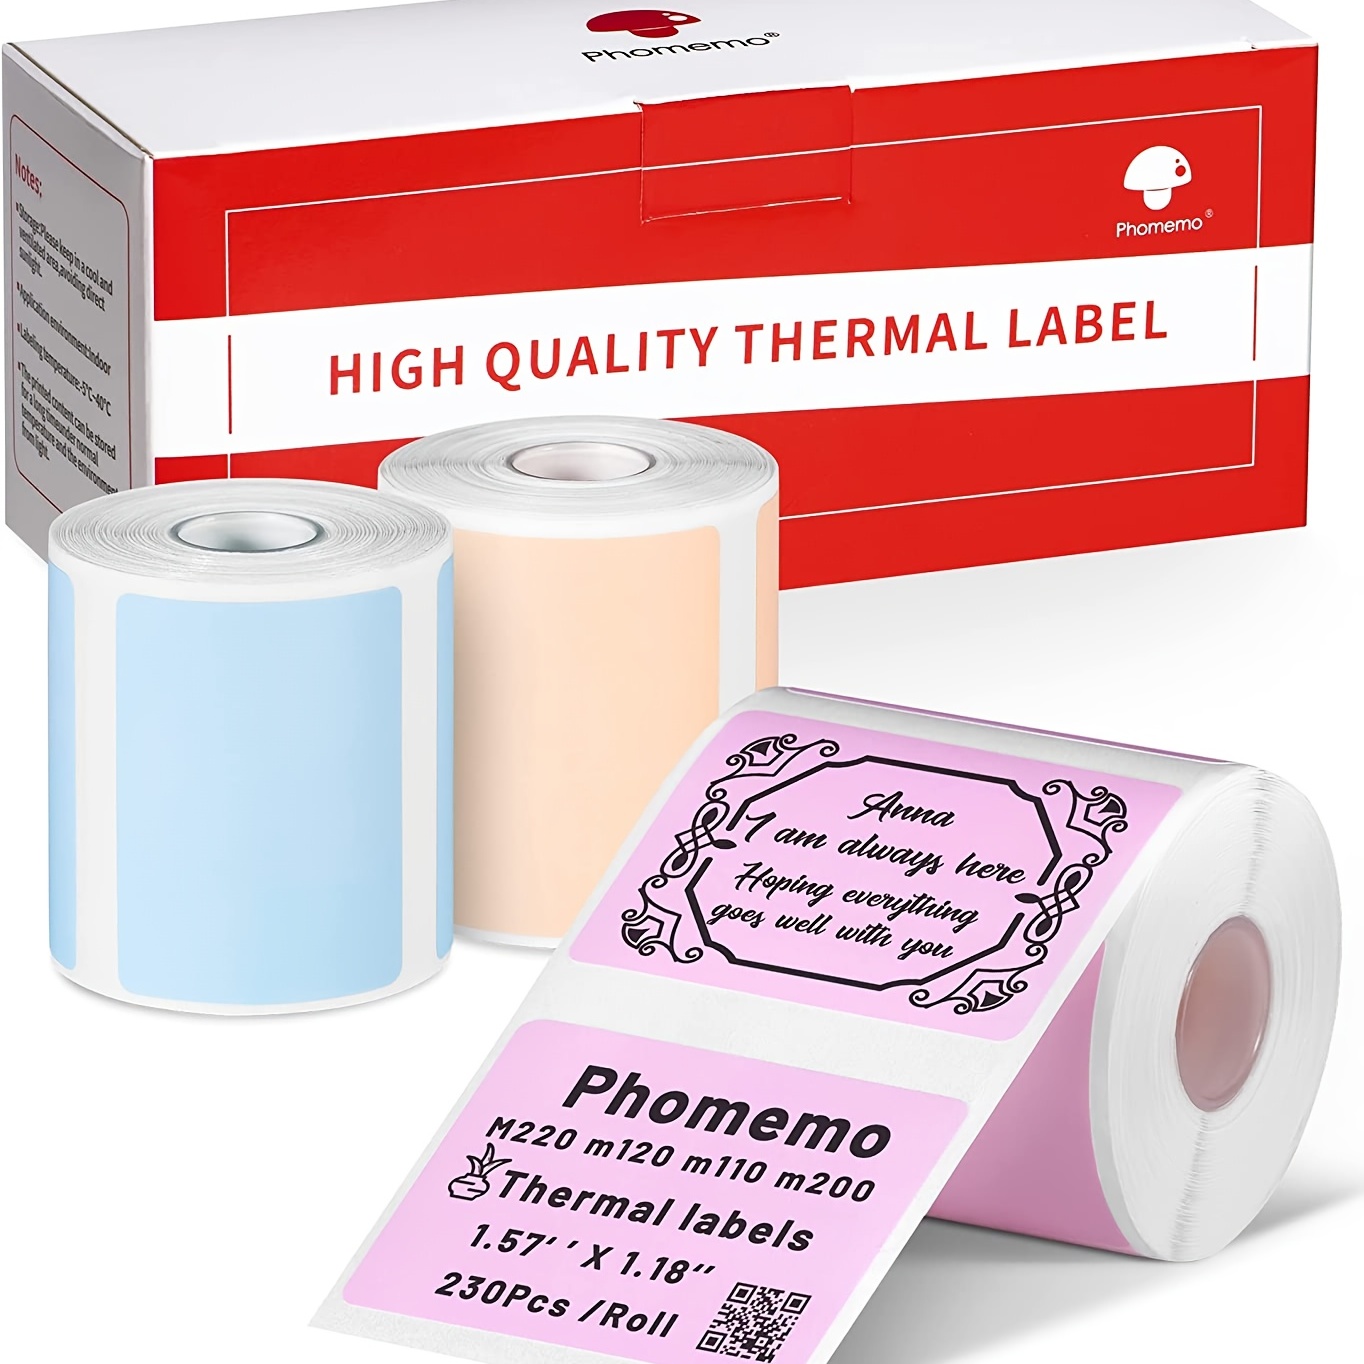 Buy Phomemo Thermal Labels at Lowest Prices